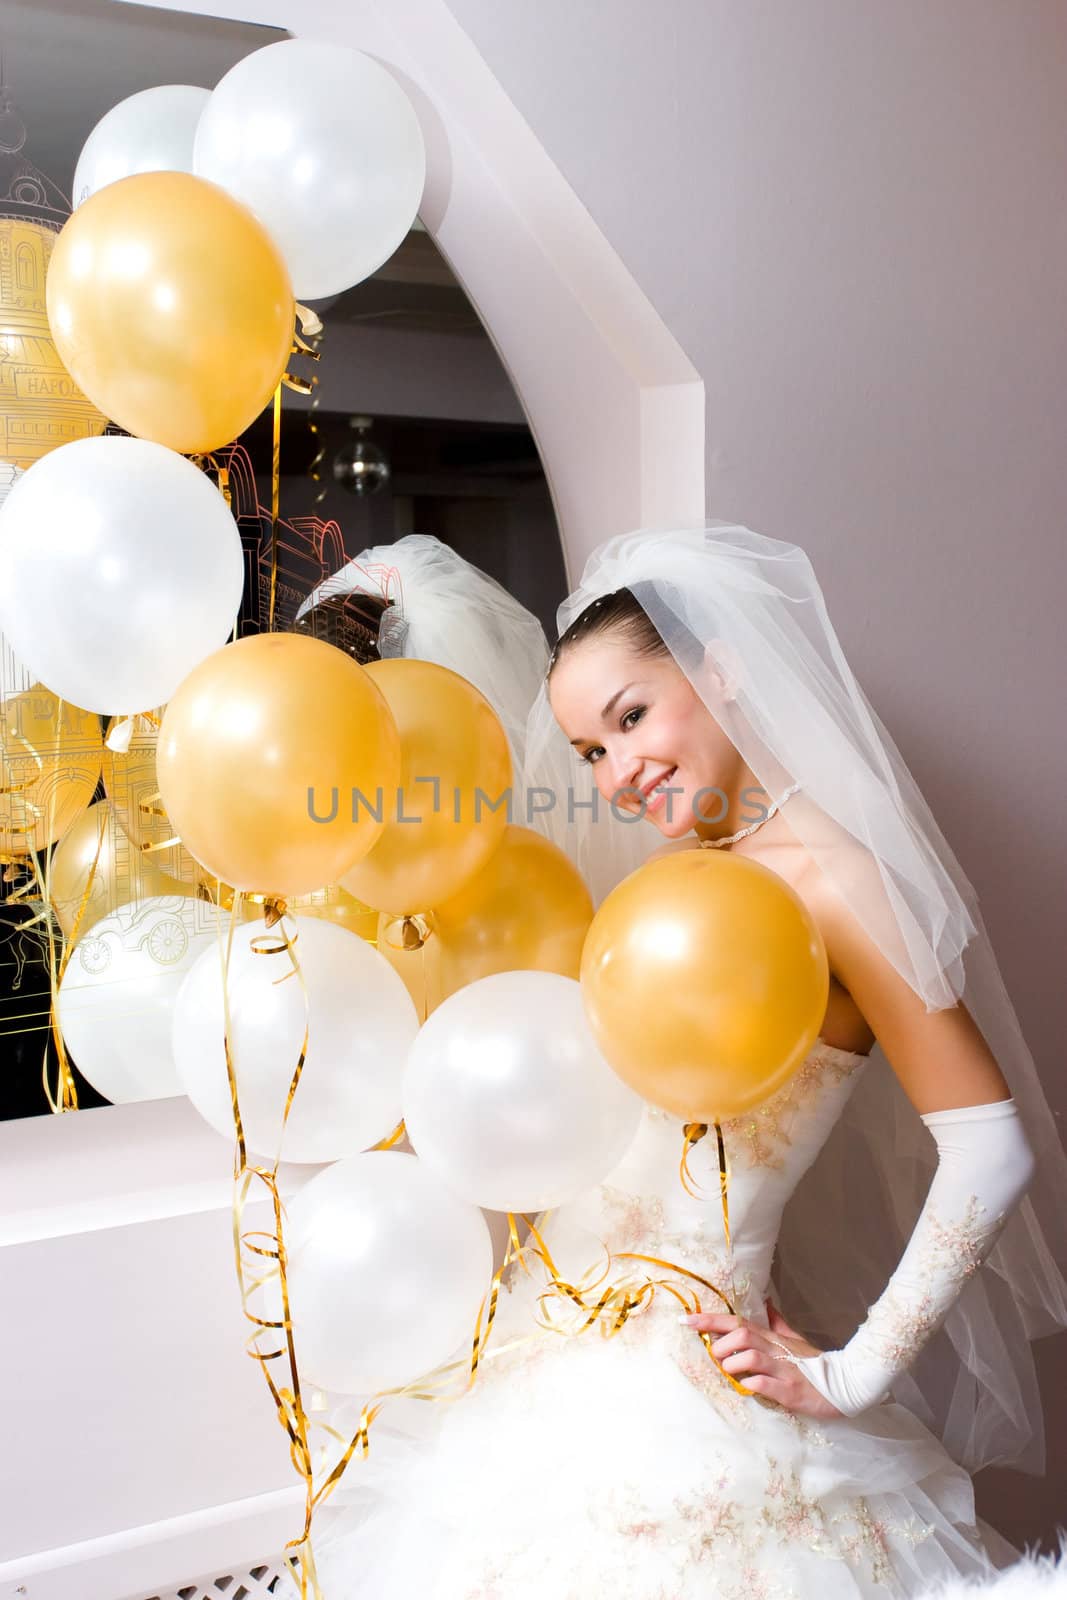 bride with balloons by vsurkov